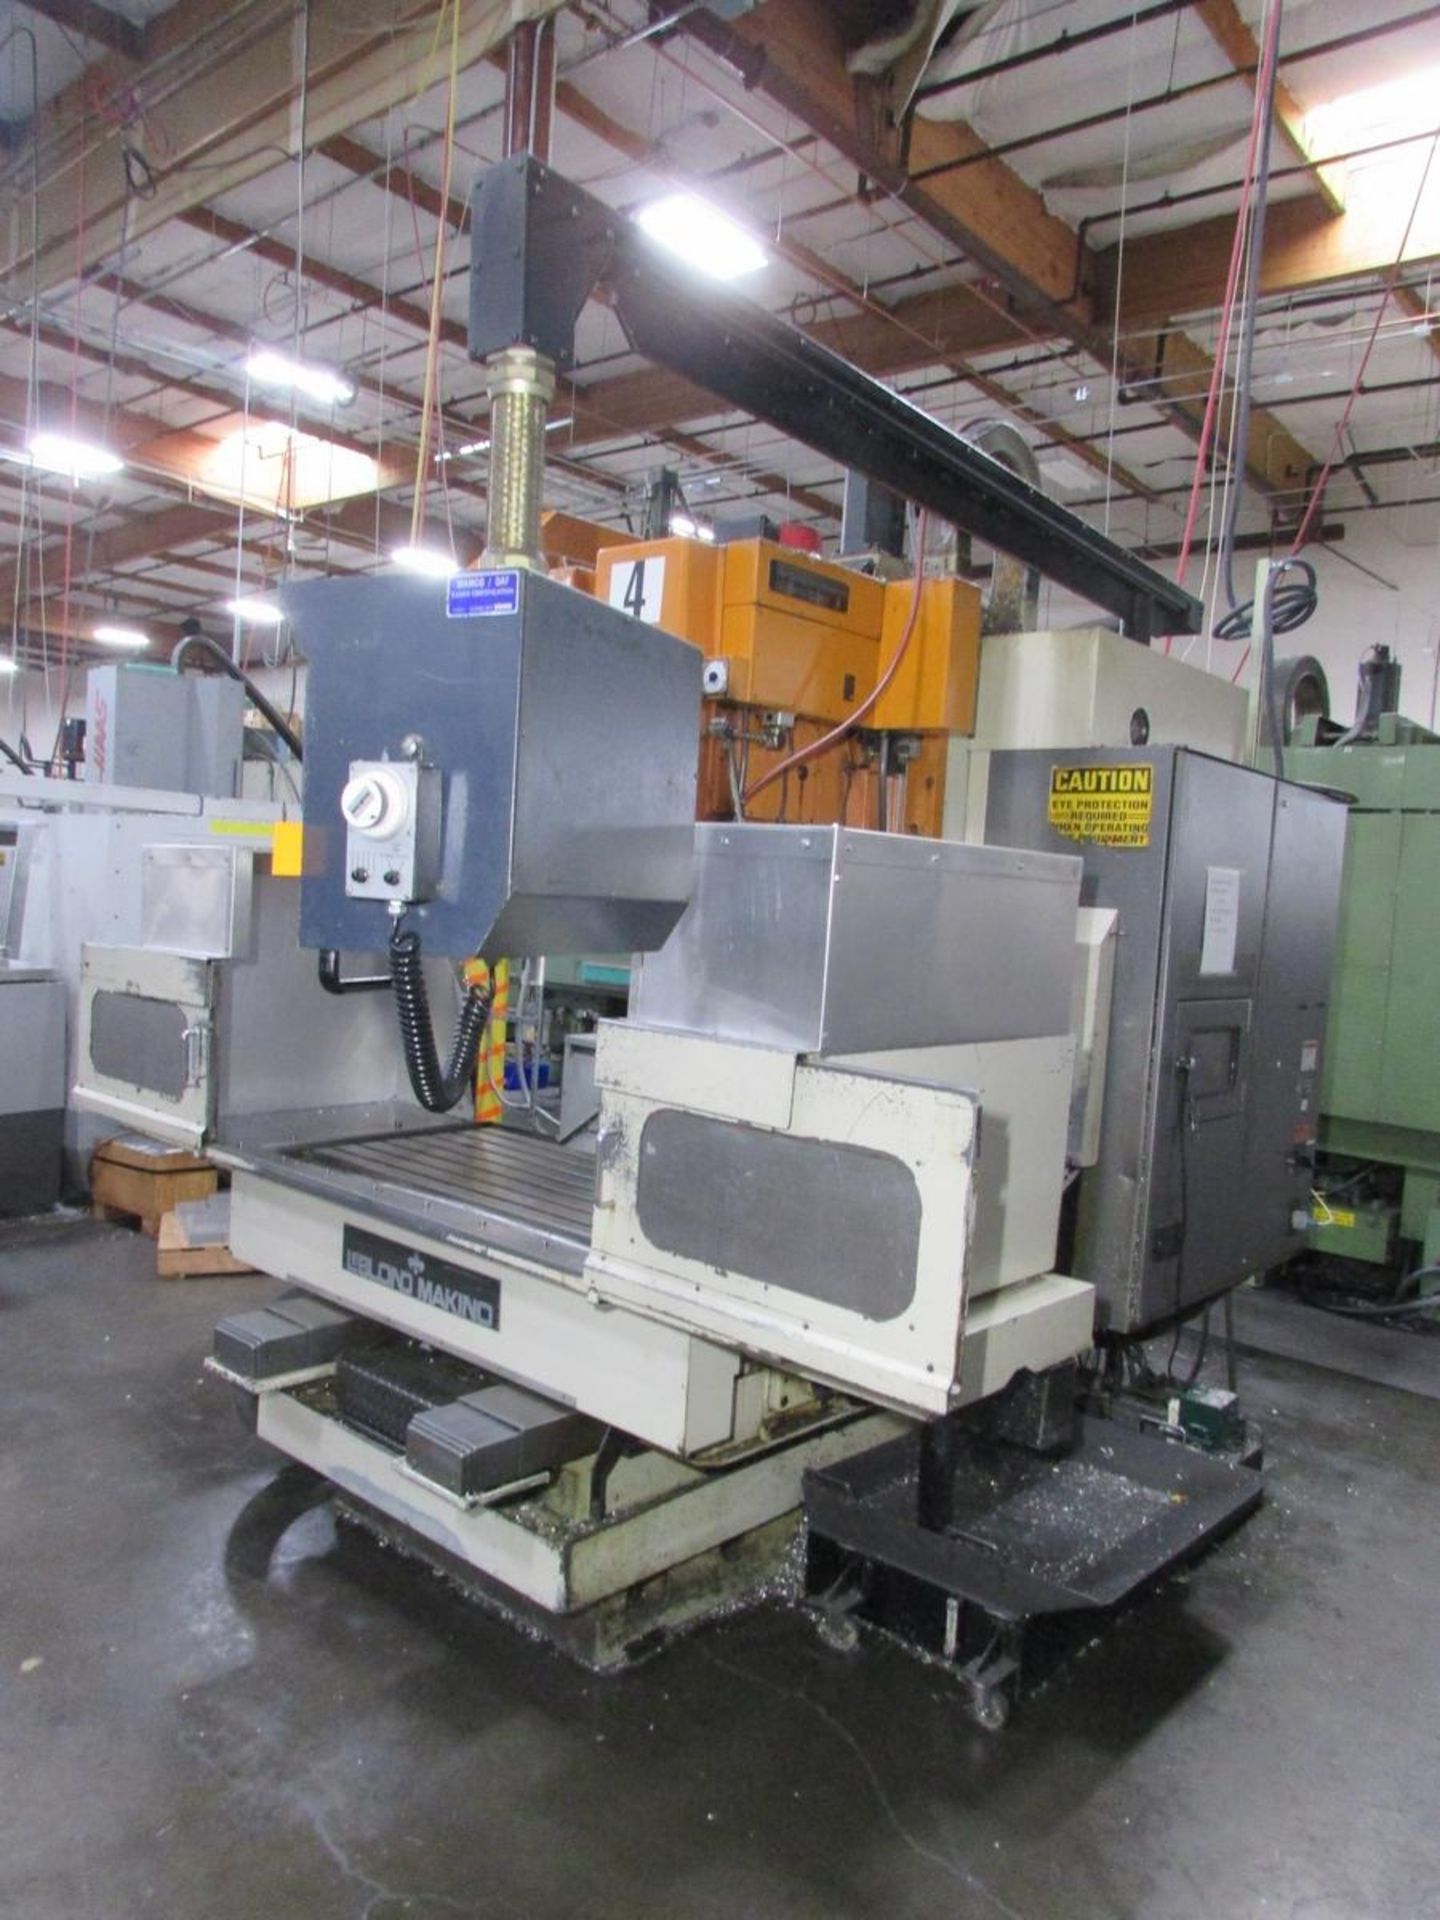 LeBlond Makino FNC106-A30 3-Axis CNC Vertical Maching Center - Image 13 of 25